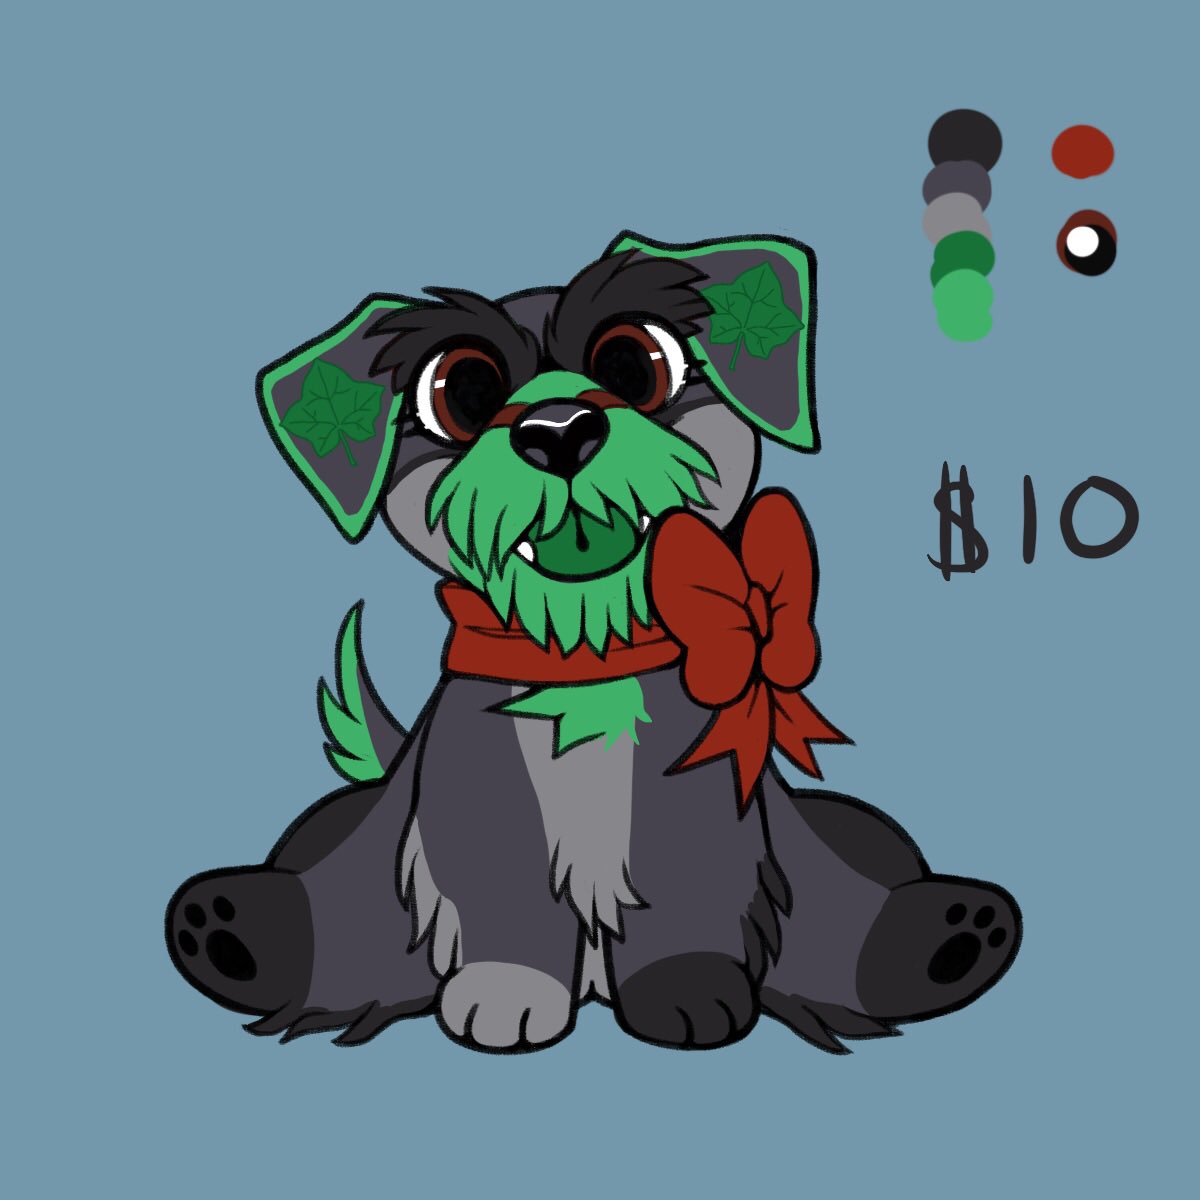 1. AWD $25Base by @ Aledles 2. Scottish Terrier $10Base by @ thekingtheory Comment to claim